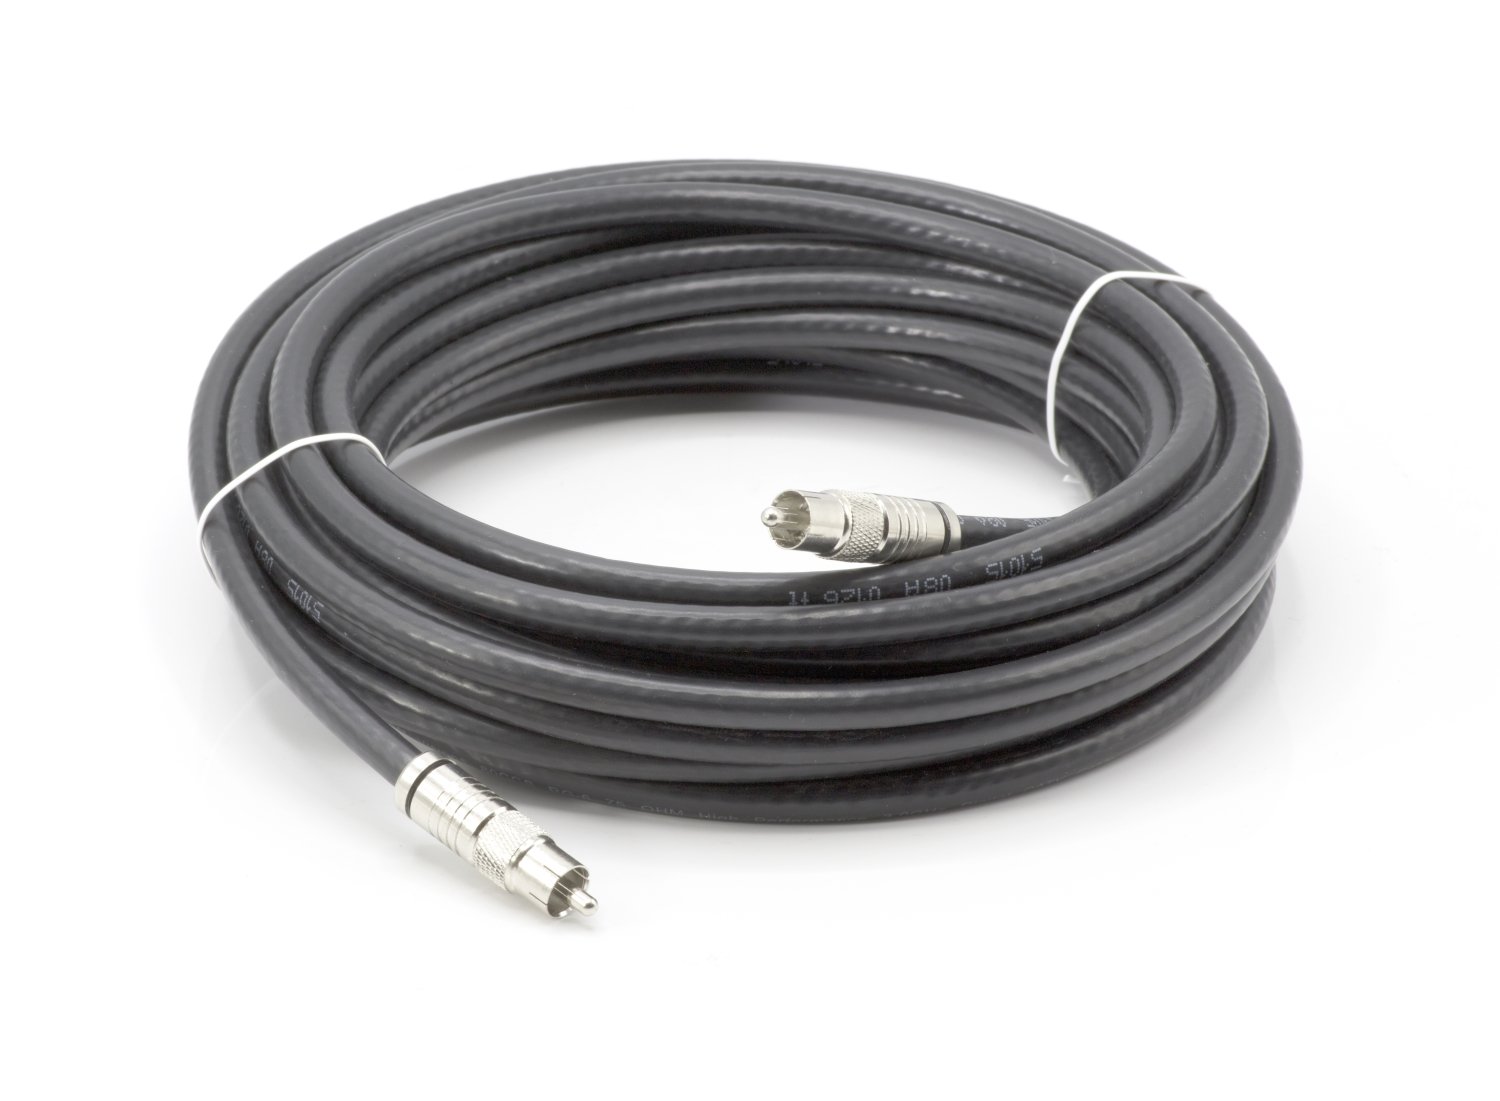 THE CIMPLE CO - Digital Audio Coaxial Cable - Subwoofer Cable - (S/PDIF) RCA Cable, 200 Feet - image 1 of 6